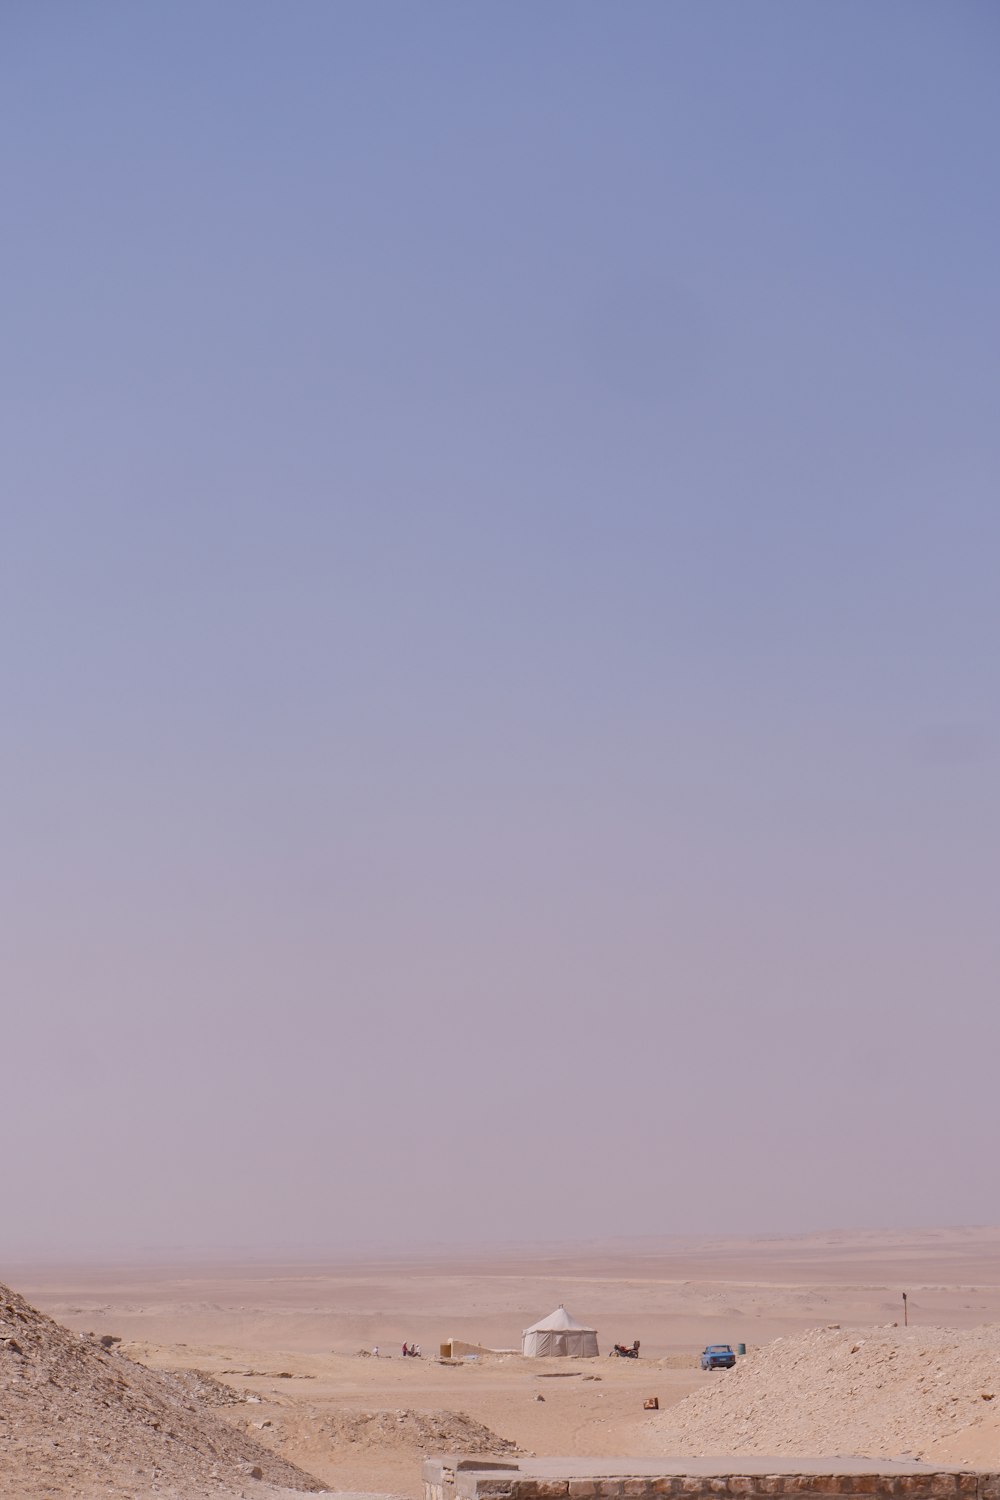 a desert scene with a few vehicles in the distance